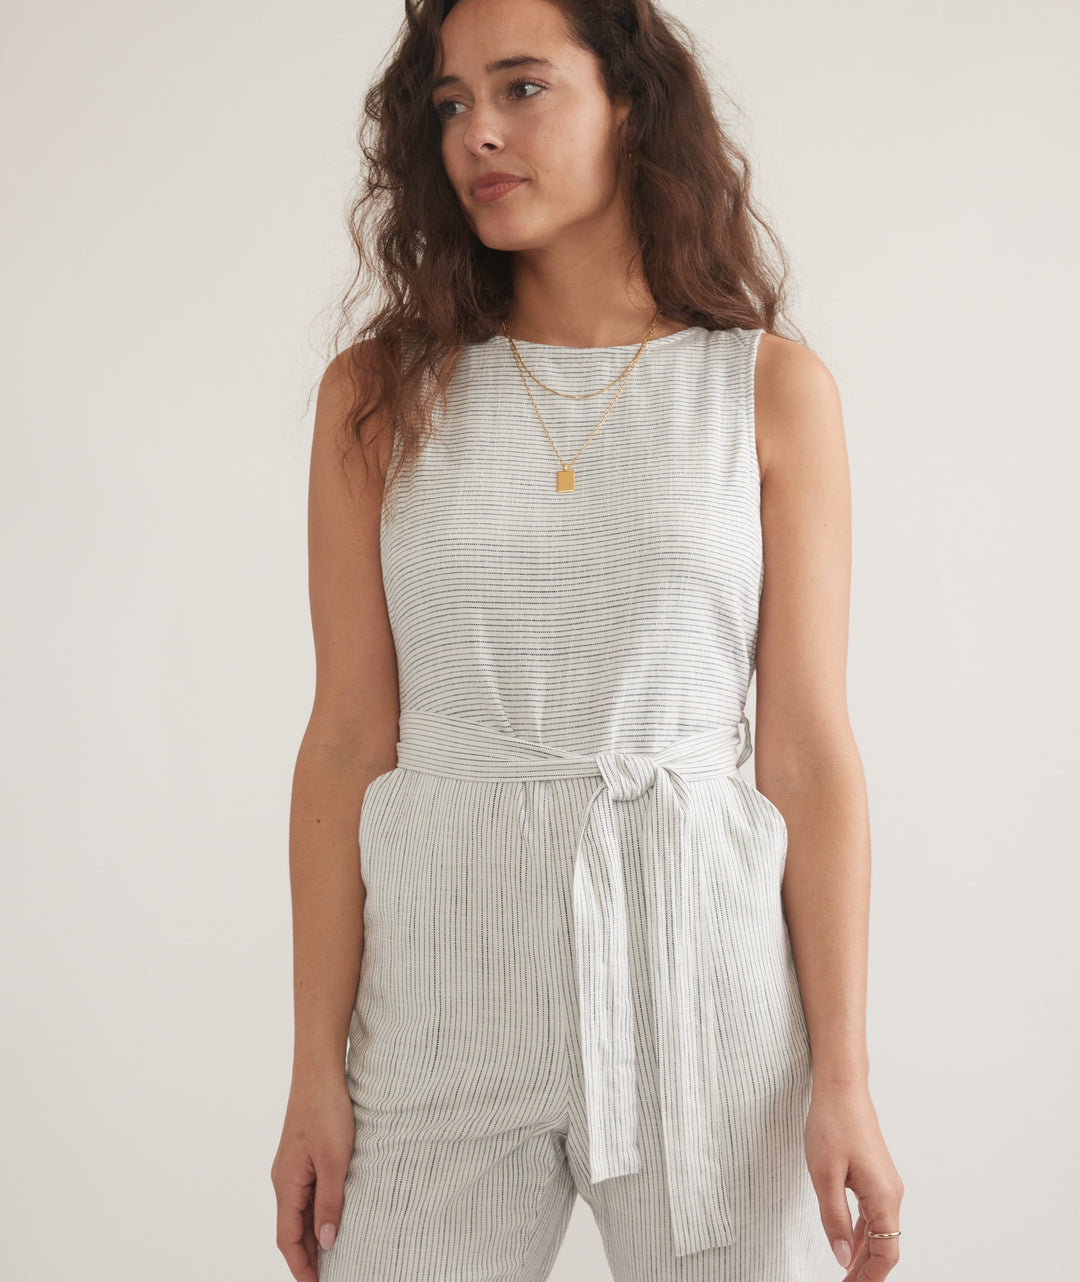 Marine Layer Eloise Belted Jumpsuit